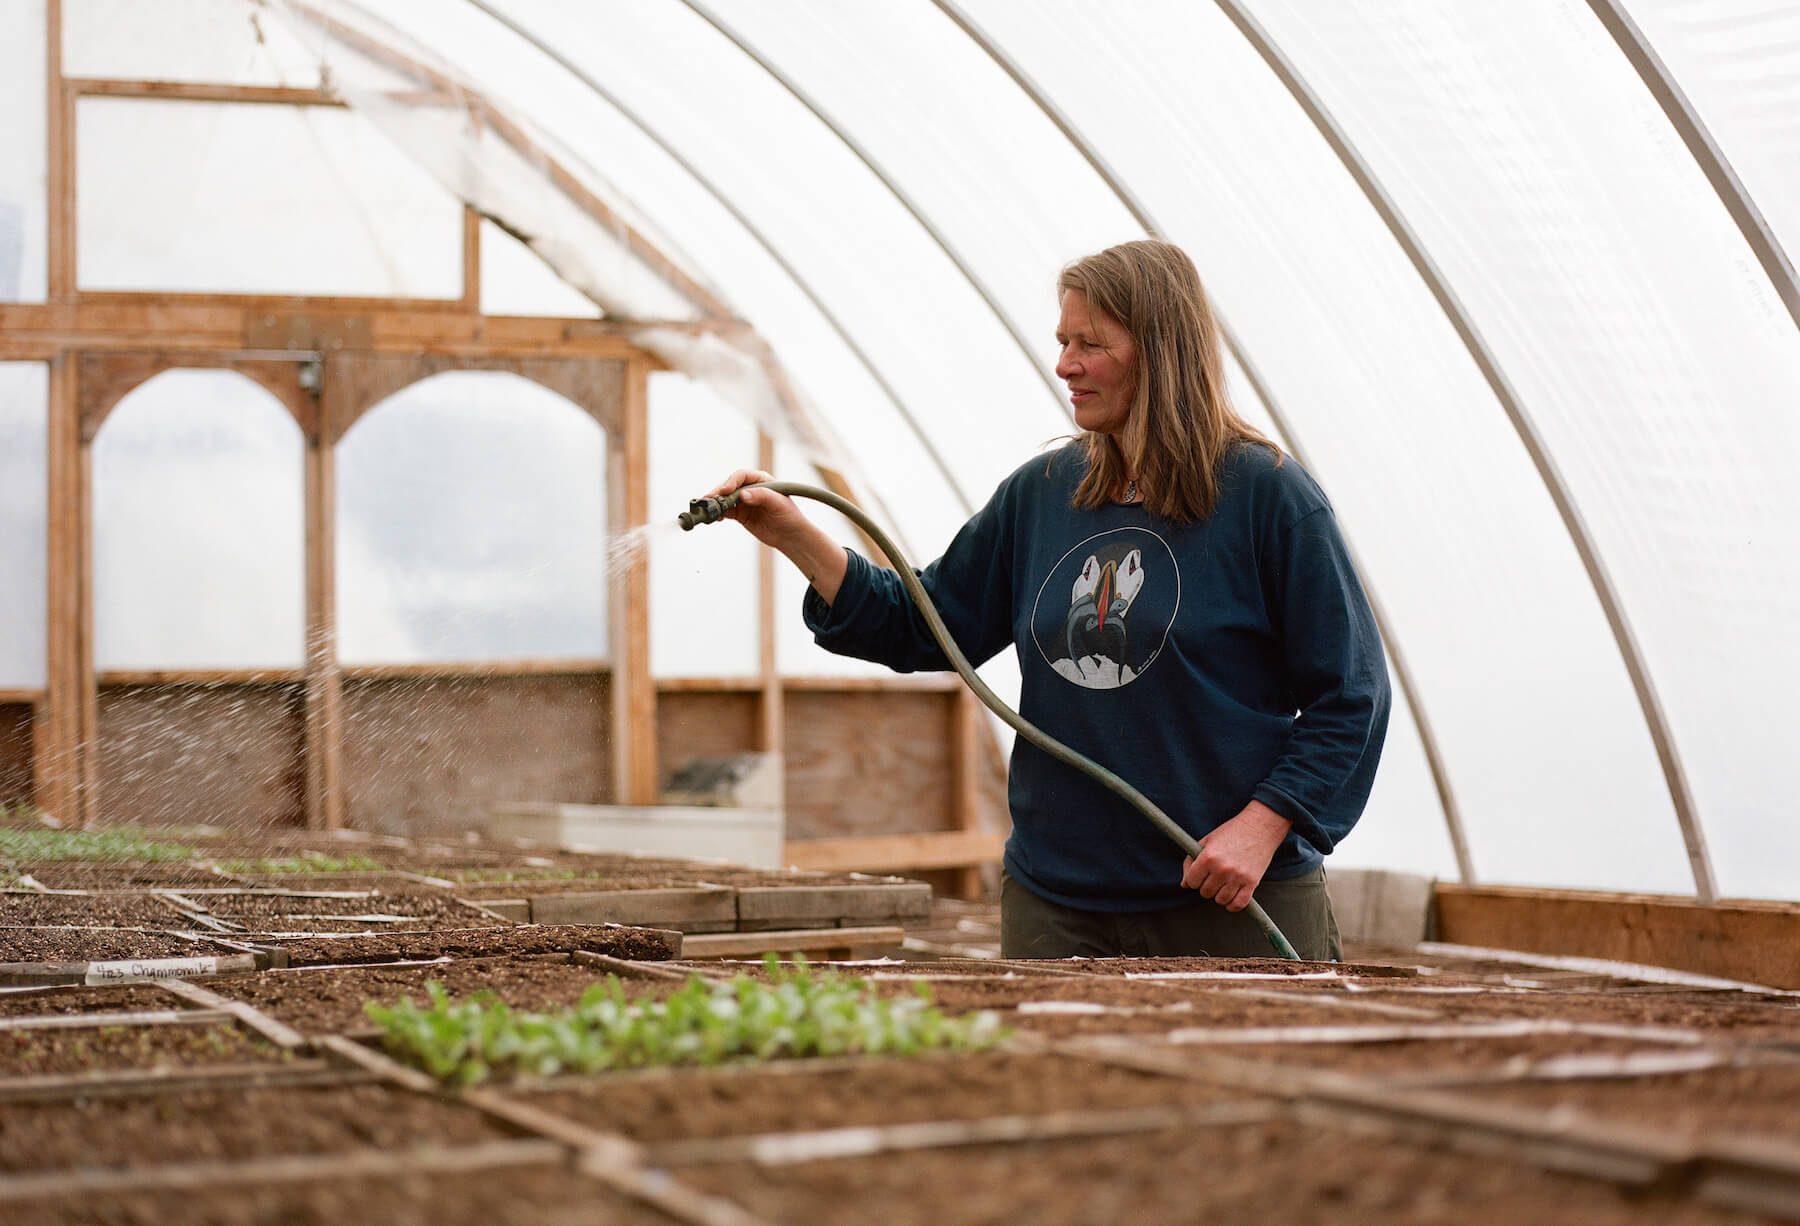 Susan Willstrud, co-founder of Calypso Farm, waters seedlings in late April.